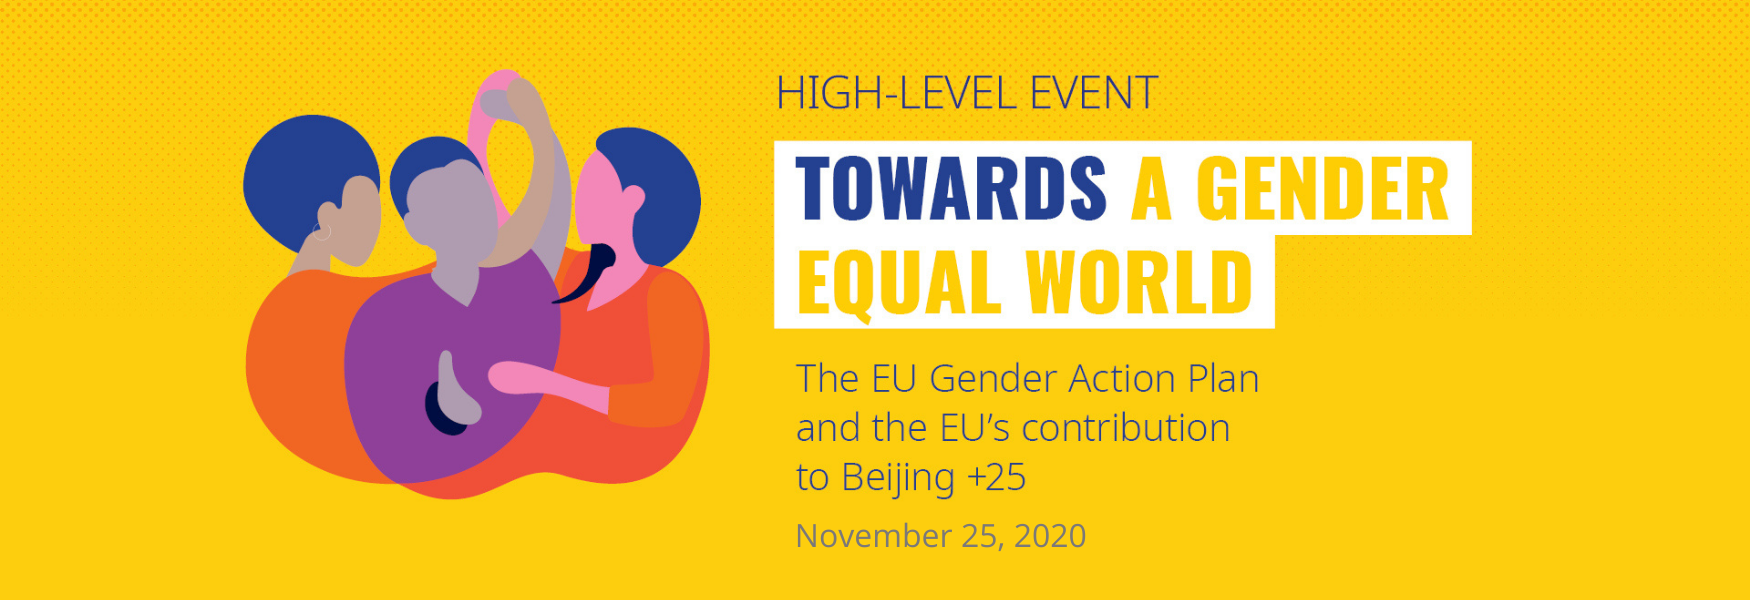 Towards a Gender-Equal World: The EU Gender Action Plan and the EU’s contribution to Beijing +25